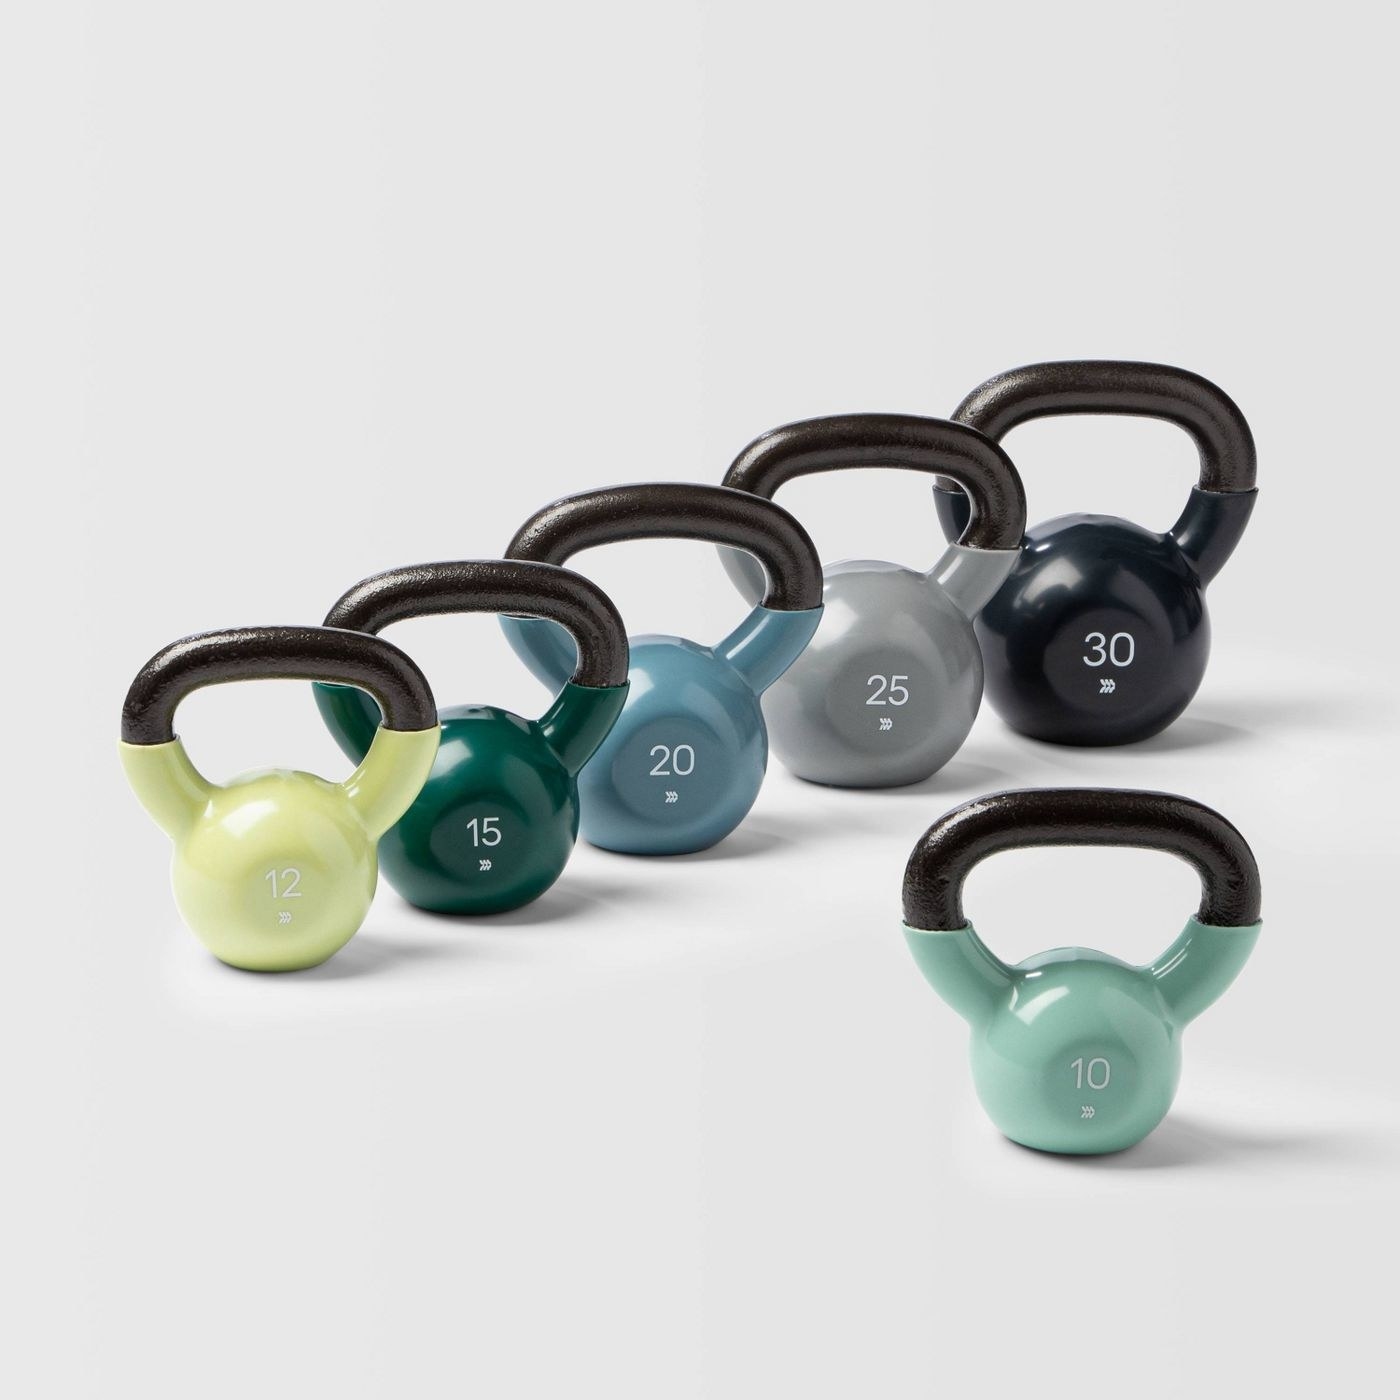 A set of different colored kettlebells between weights 10 to 30 pounds.